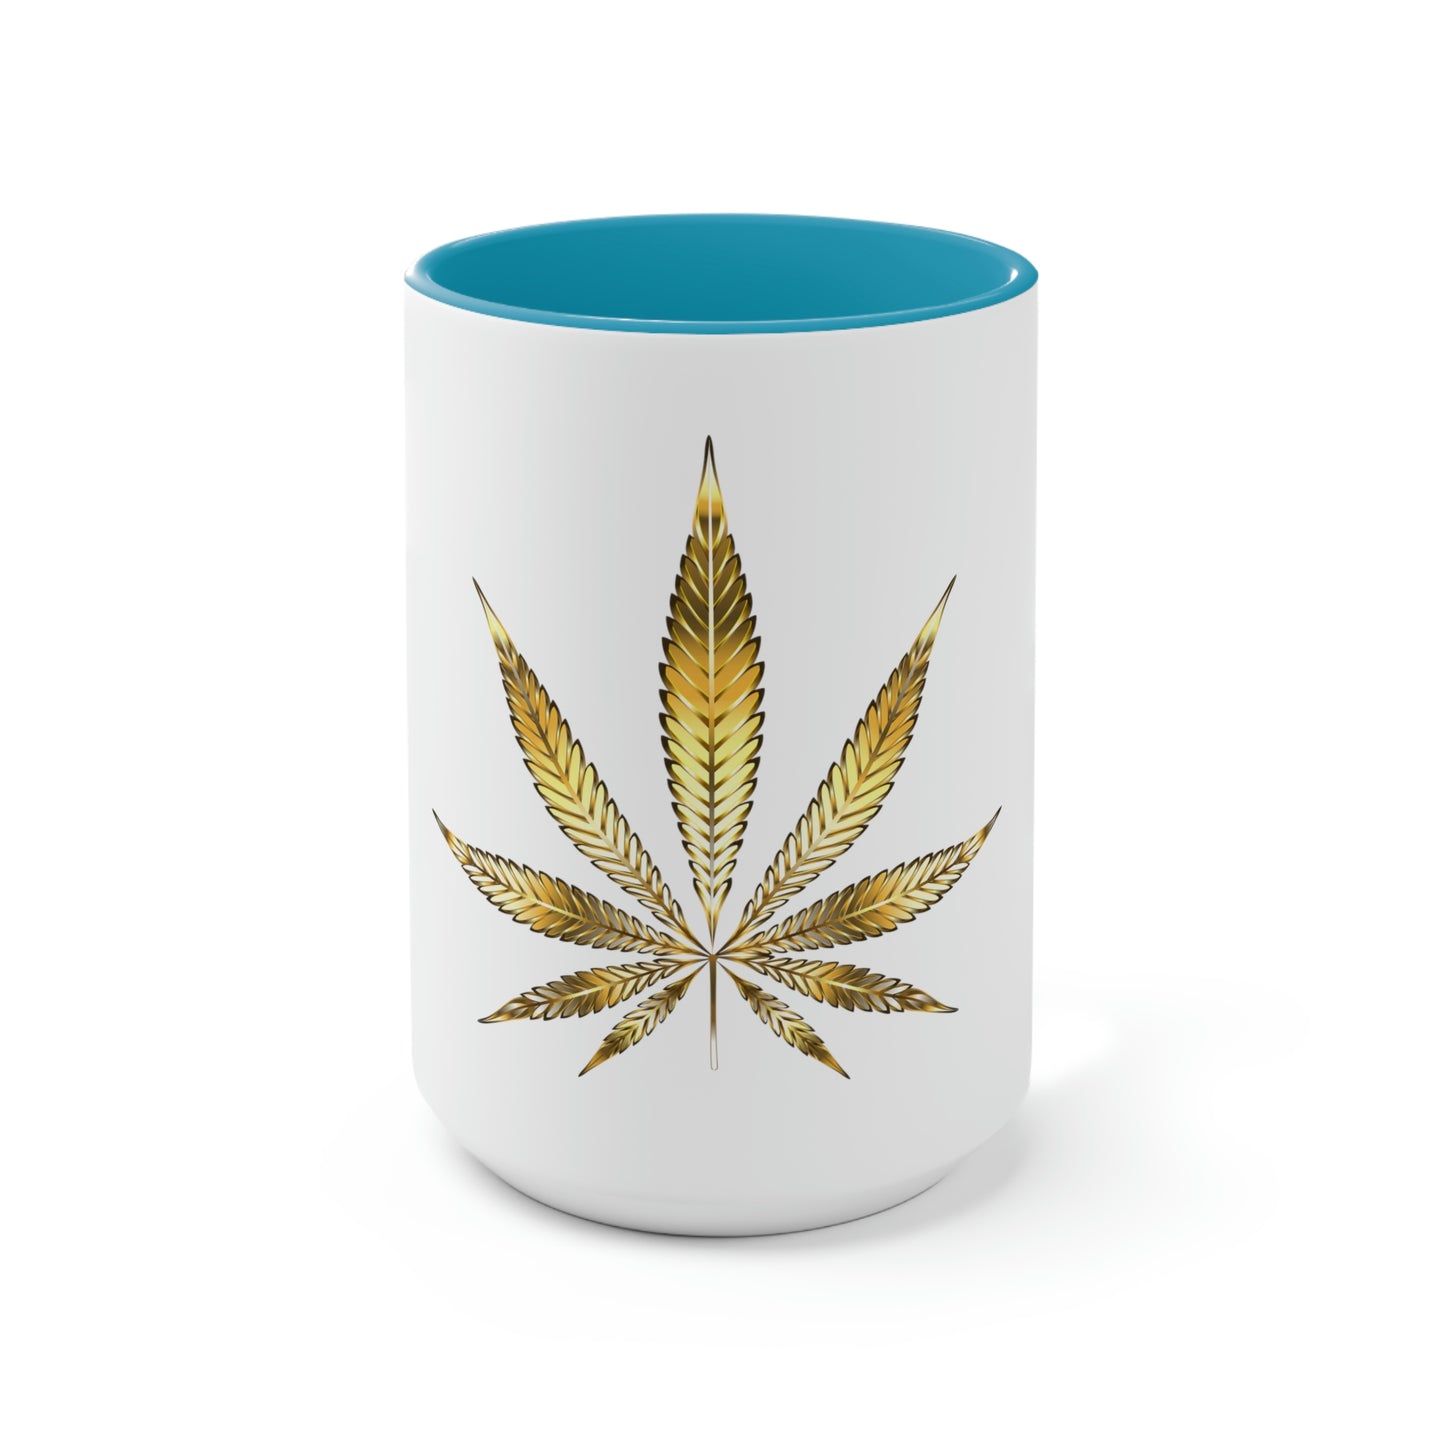 A white cannabis mug with a light blue interior featuring a bright gold weed leaf on the front center.